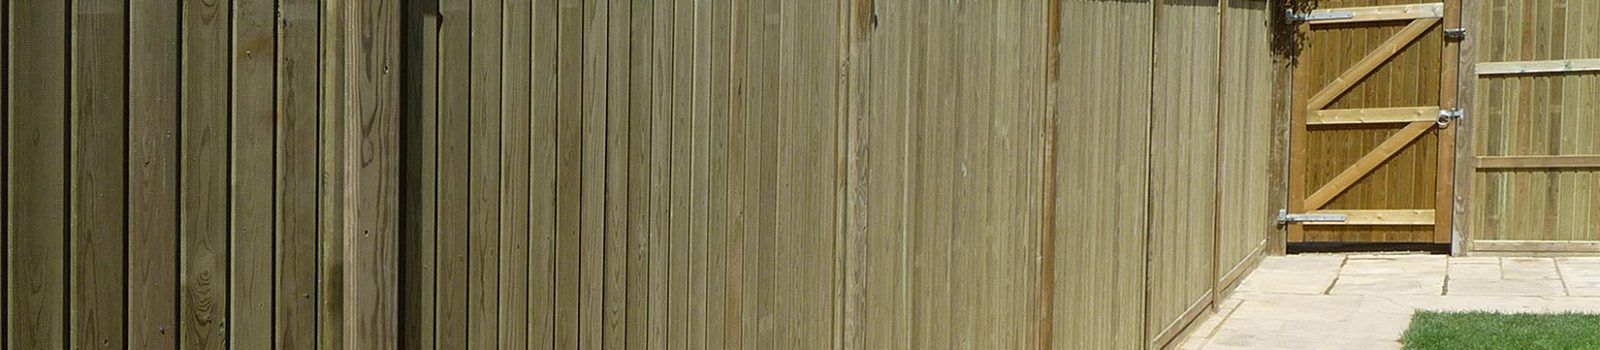 Fence Panels South London | Tongue and groove fencing